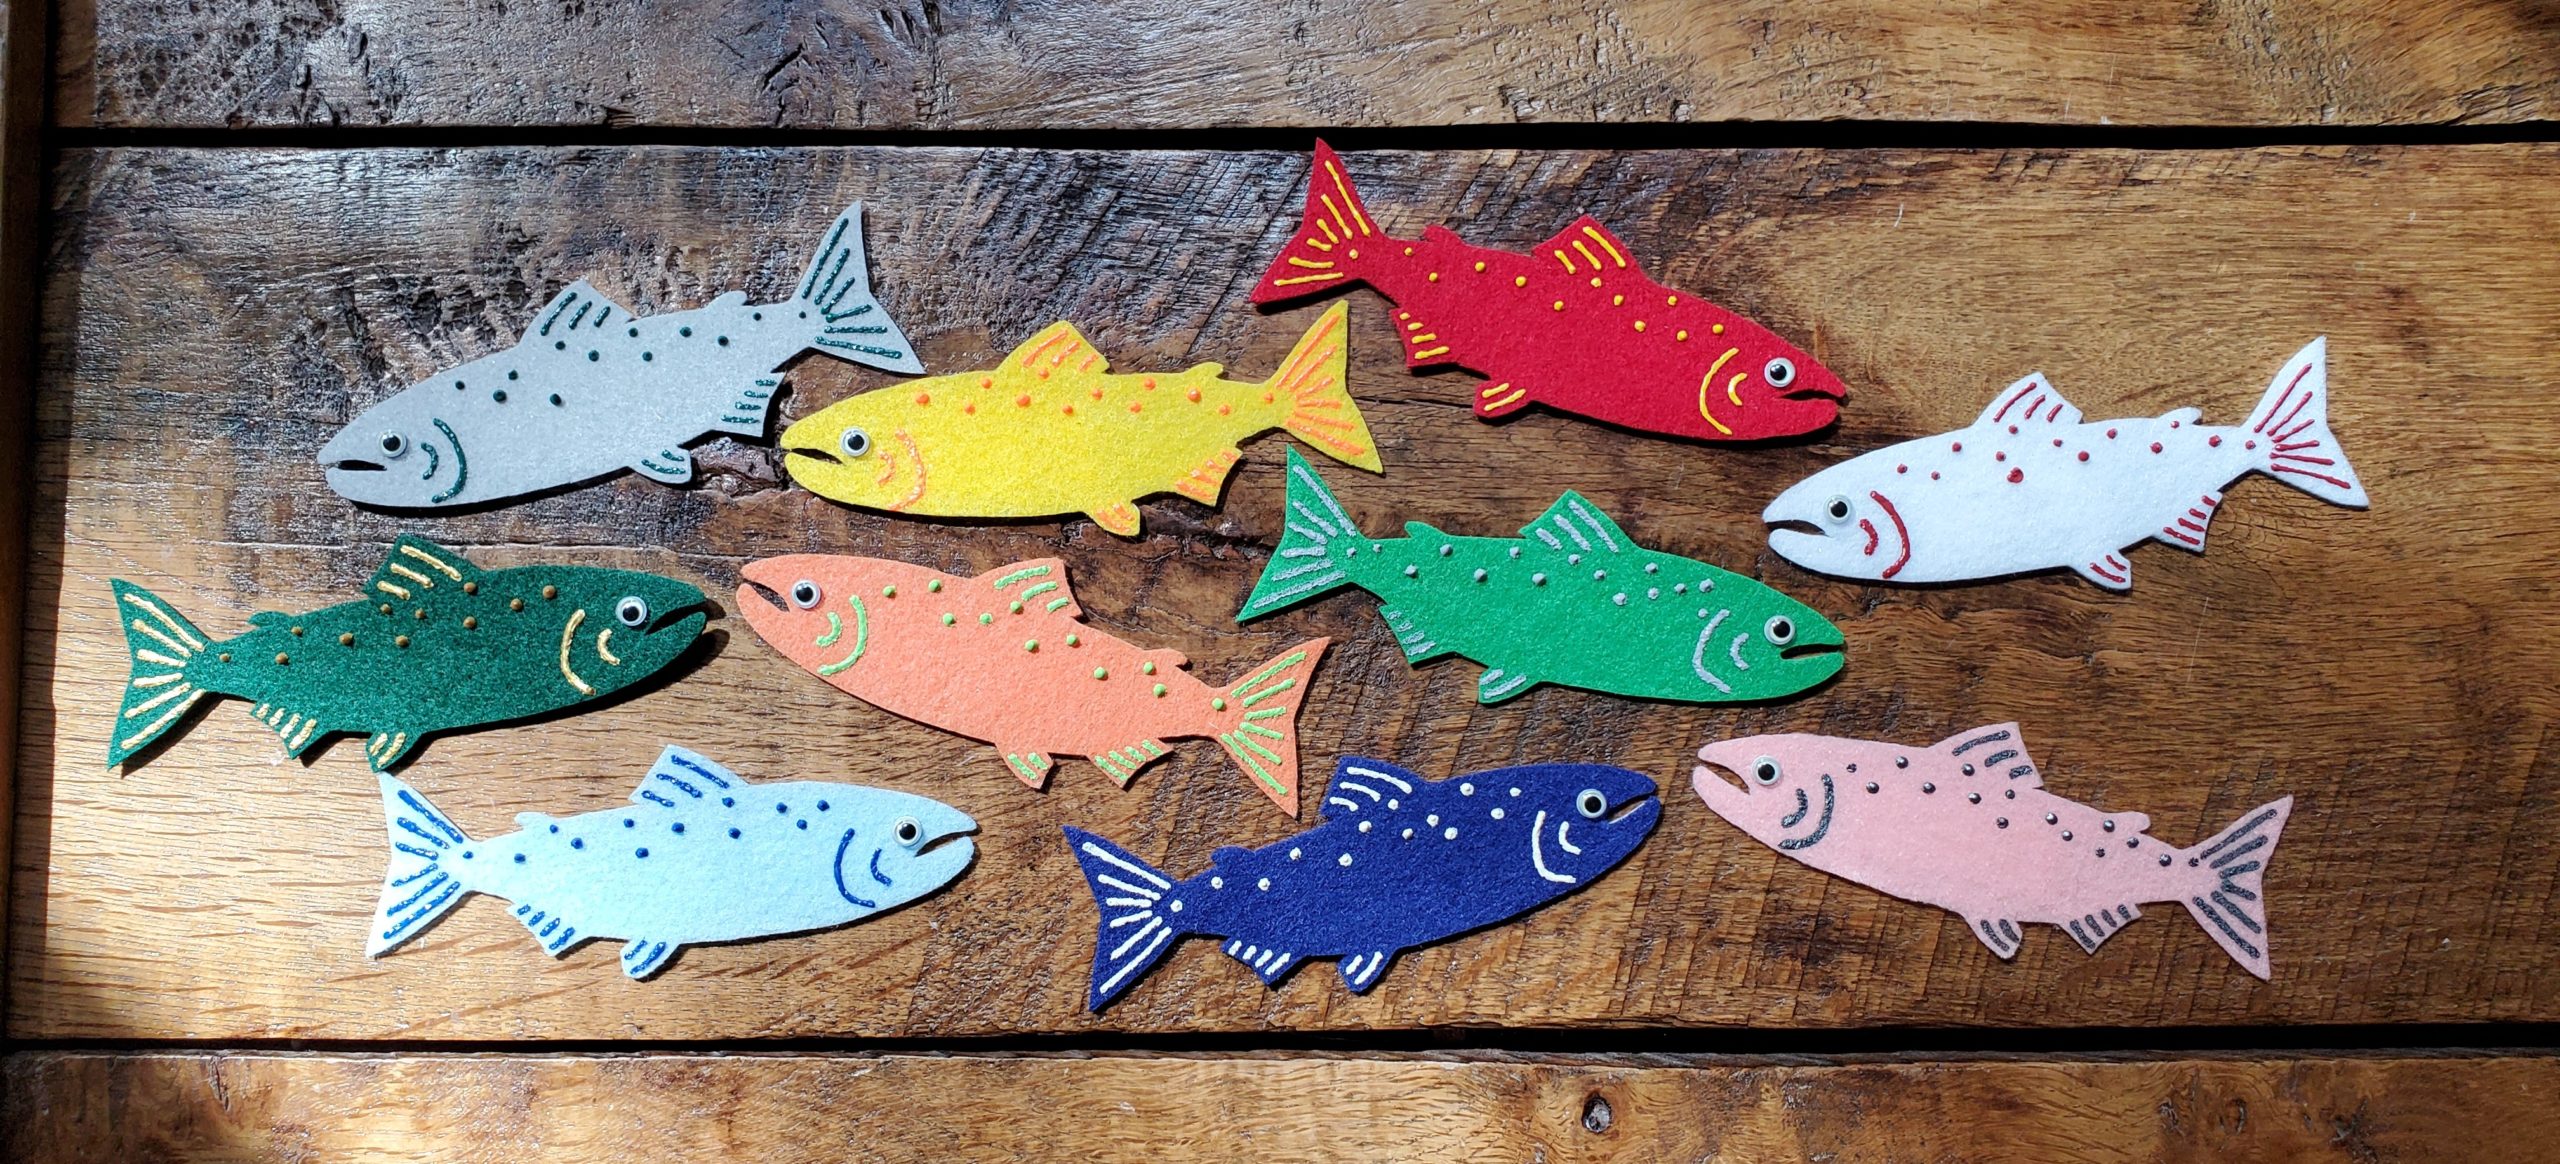 A colorful school of construction paper fish 